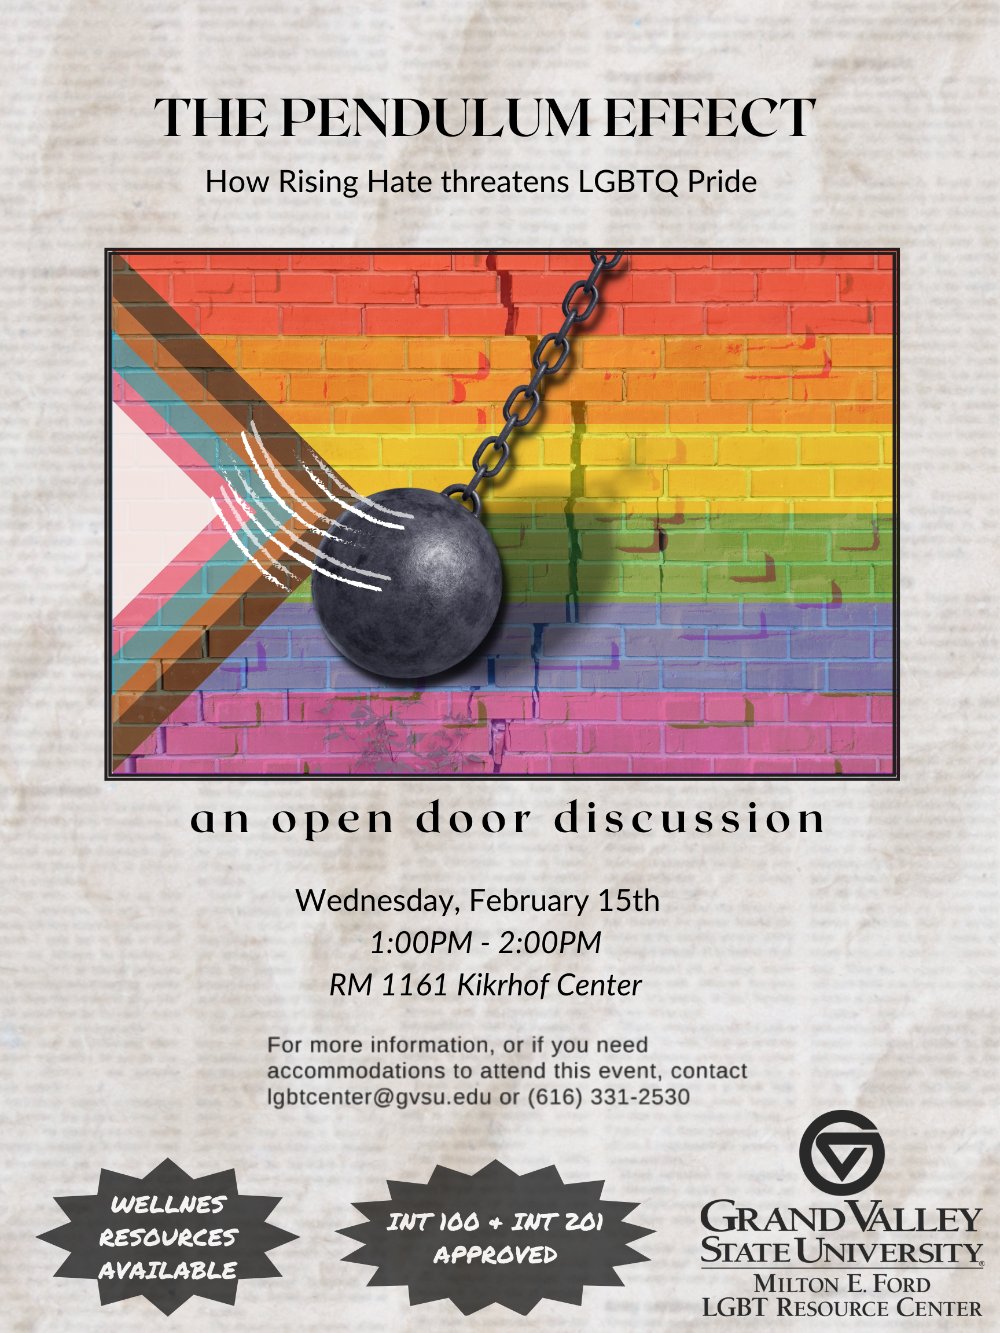 Flyer that reads "The Pendulum Effect: How Rising Hate Threatens LGBTQ Pride" There is a Progress Pride flag in the middle, with a wrecking ball swinging toward it.